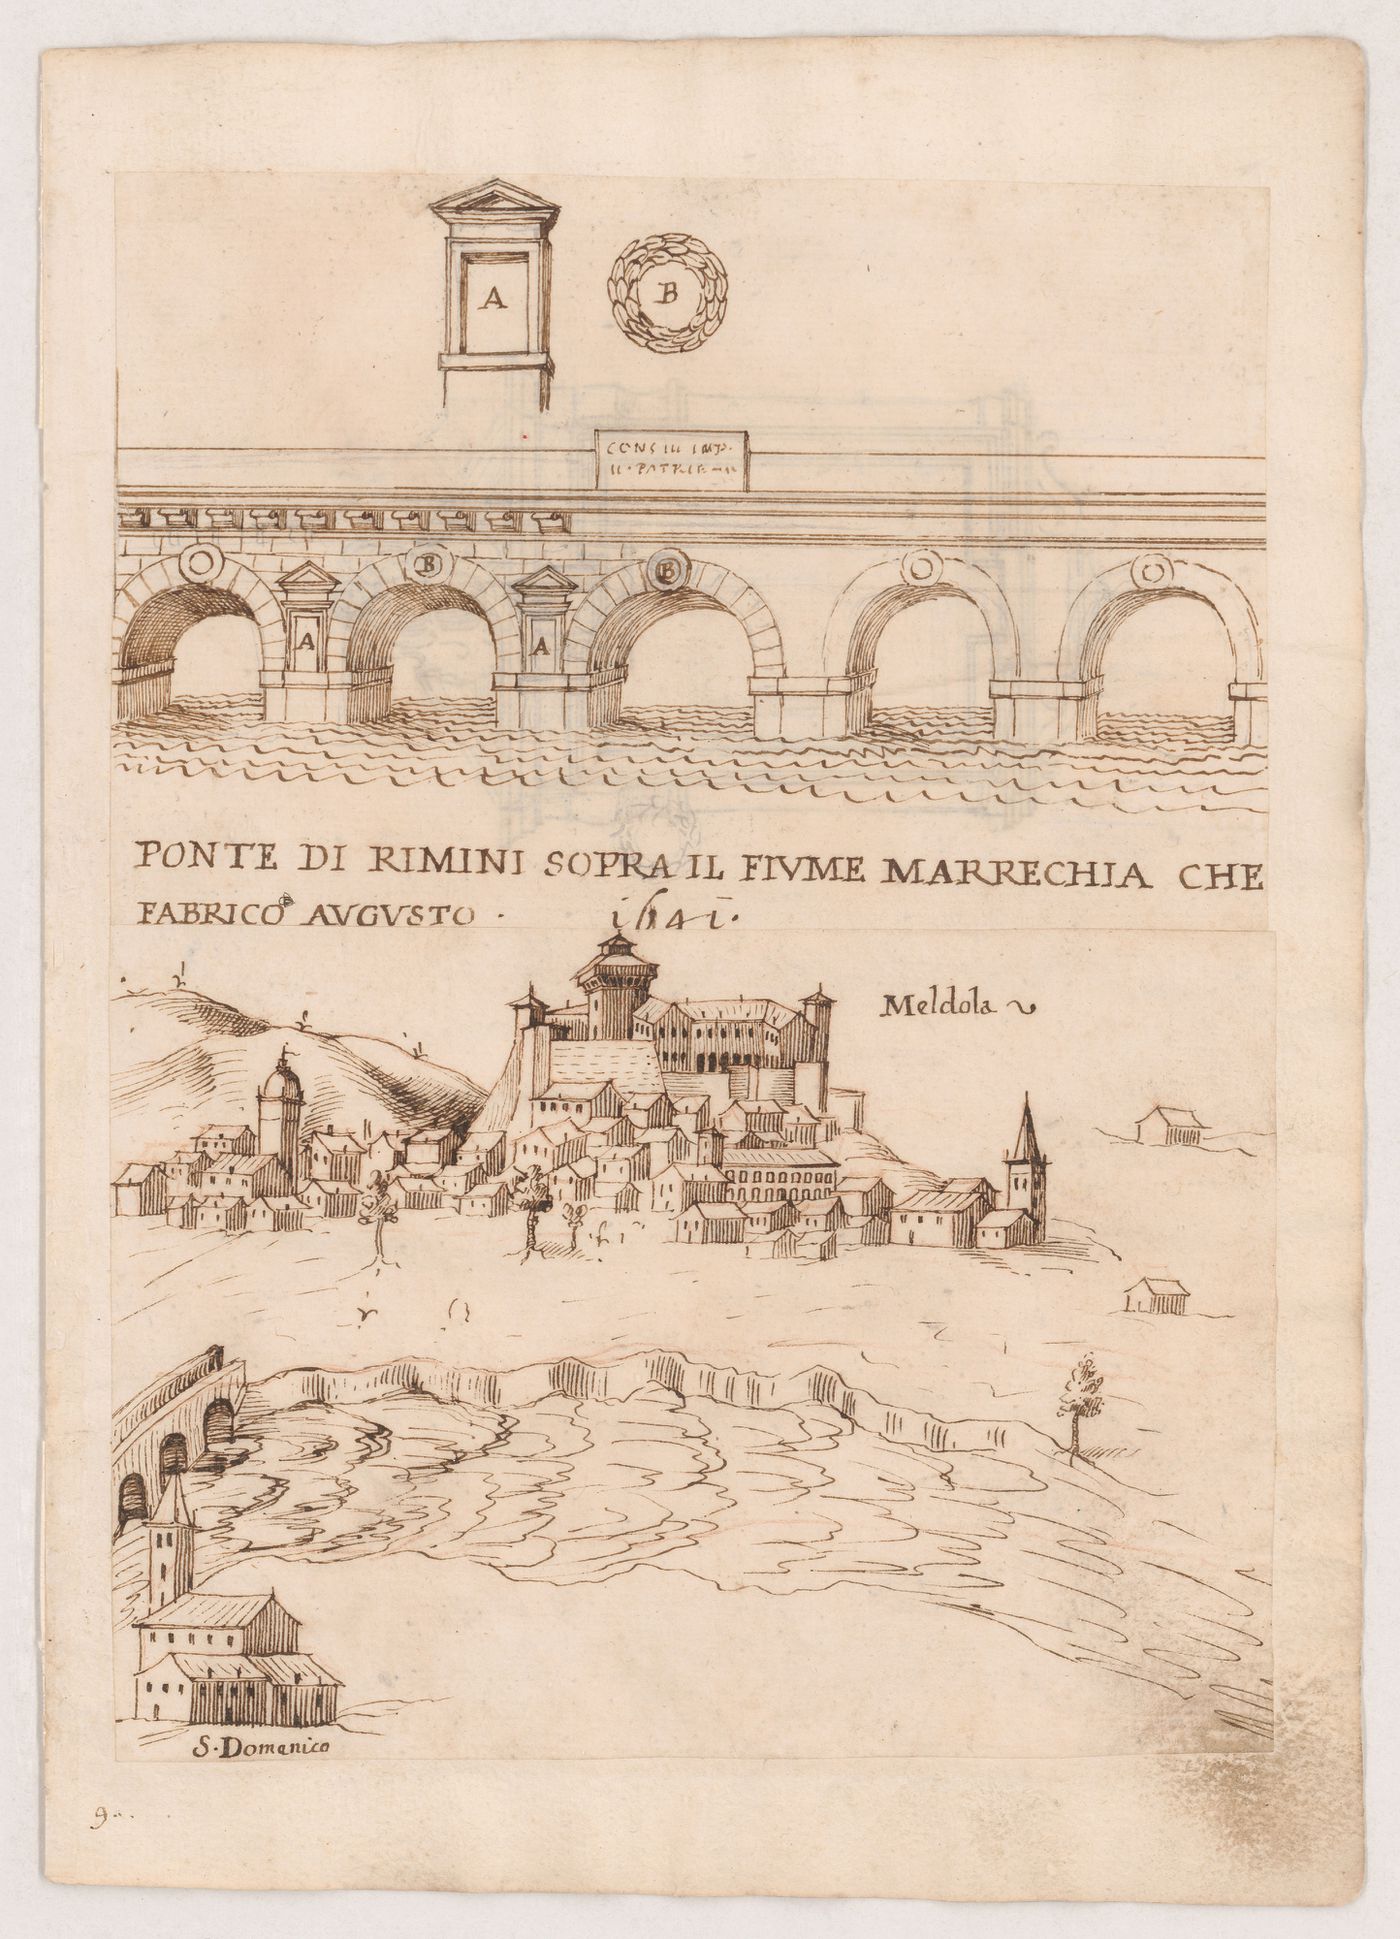 View of the Ponte di Tiberio, Rimini; View of the town of Meldola; verso: View of the town of Trevi from across the Via Romana; View of the Church of Crespino